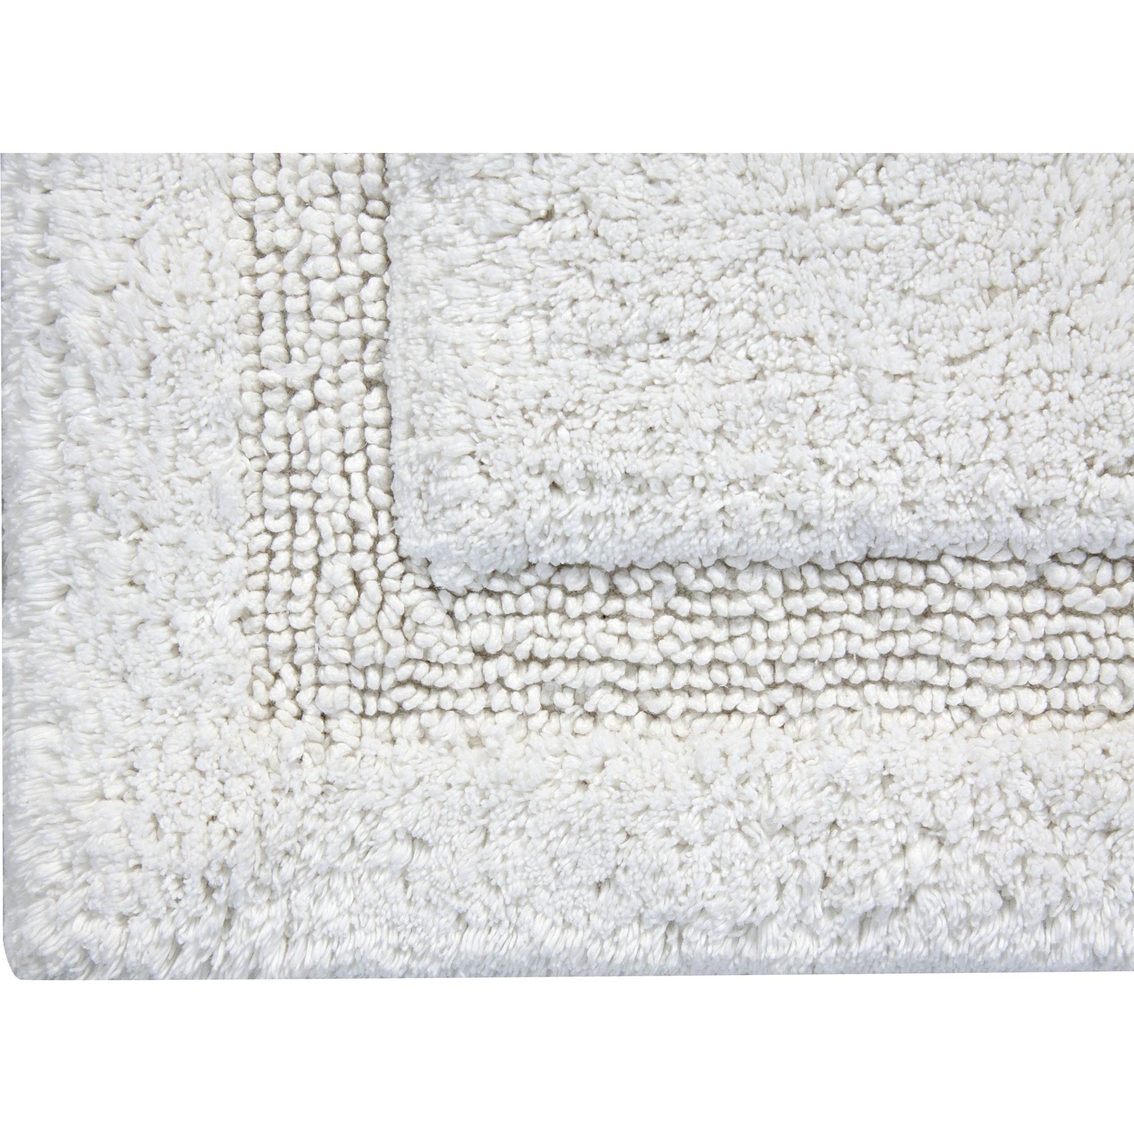 Saffron Fabs Regency 24 x 17 in. and 34 x 21 in. Cotton Bath Rug 2 pc. Set - Image 2 of 2